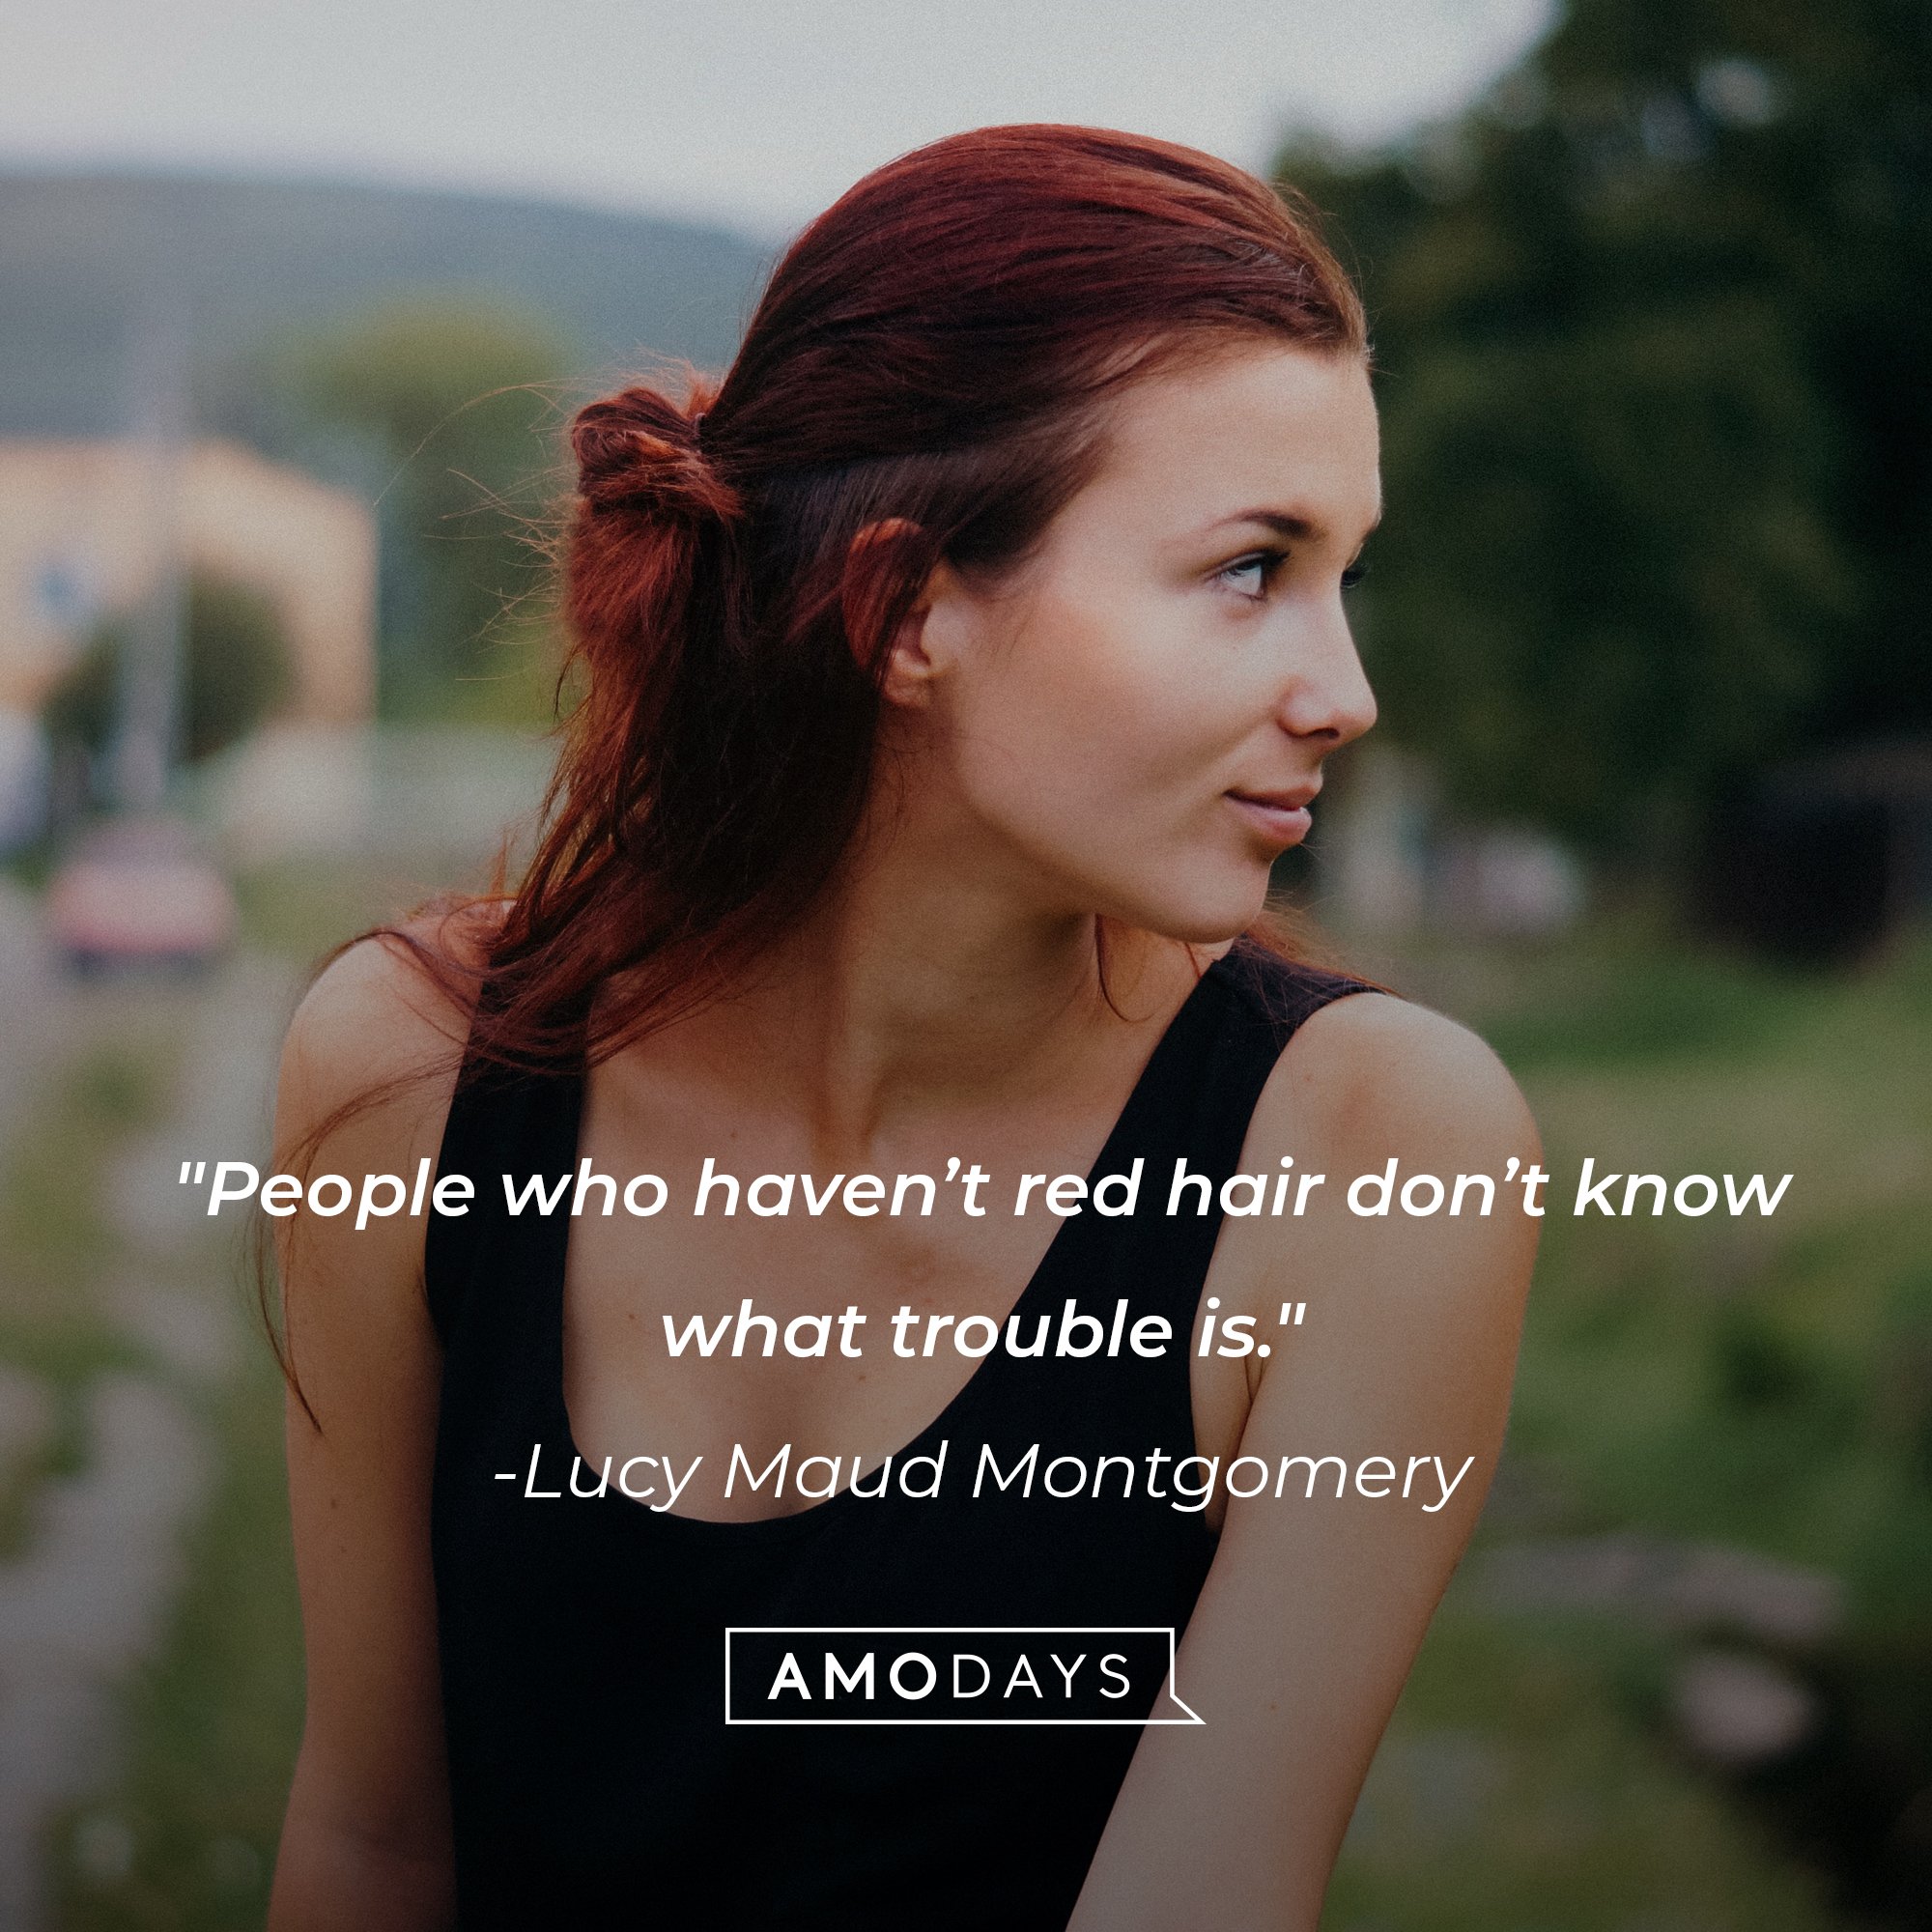 Lucy Maud Montgomery’s quote: "People who haven’t red hair don’t know what trouble is." | Image: AmoDays